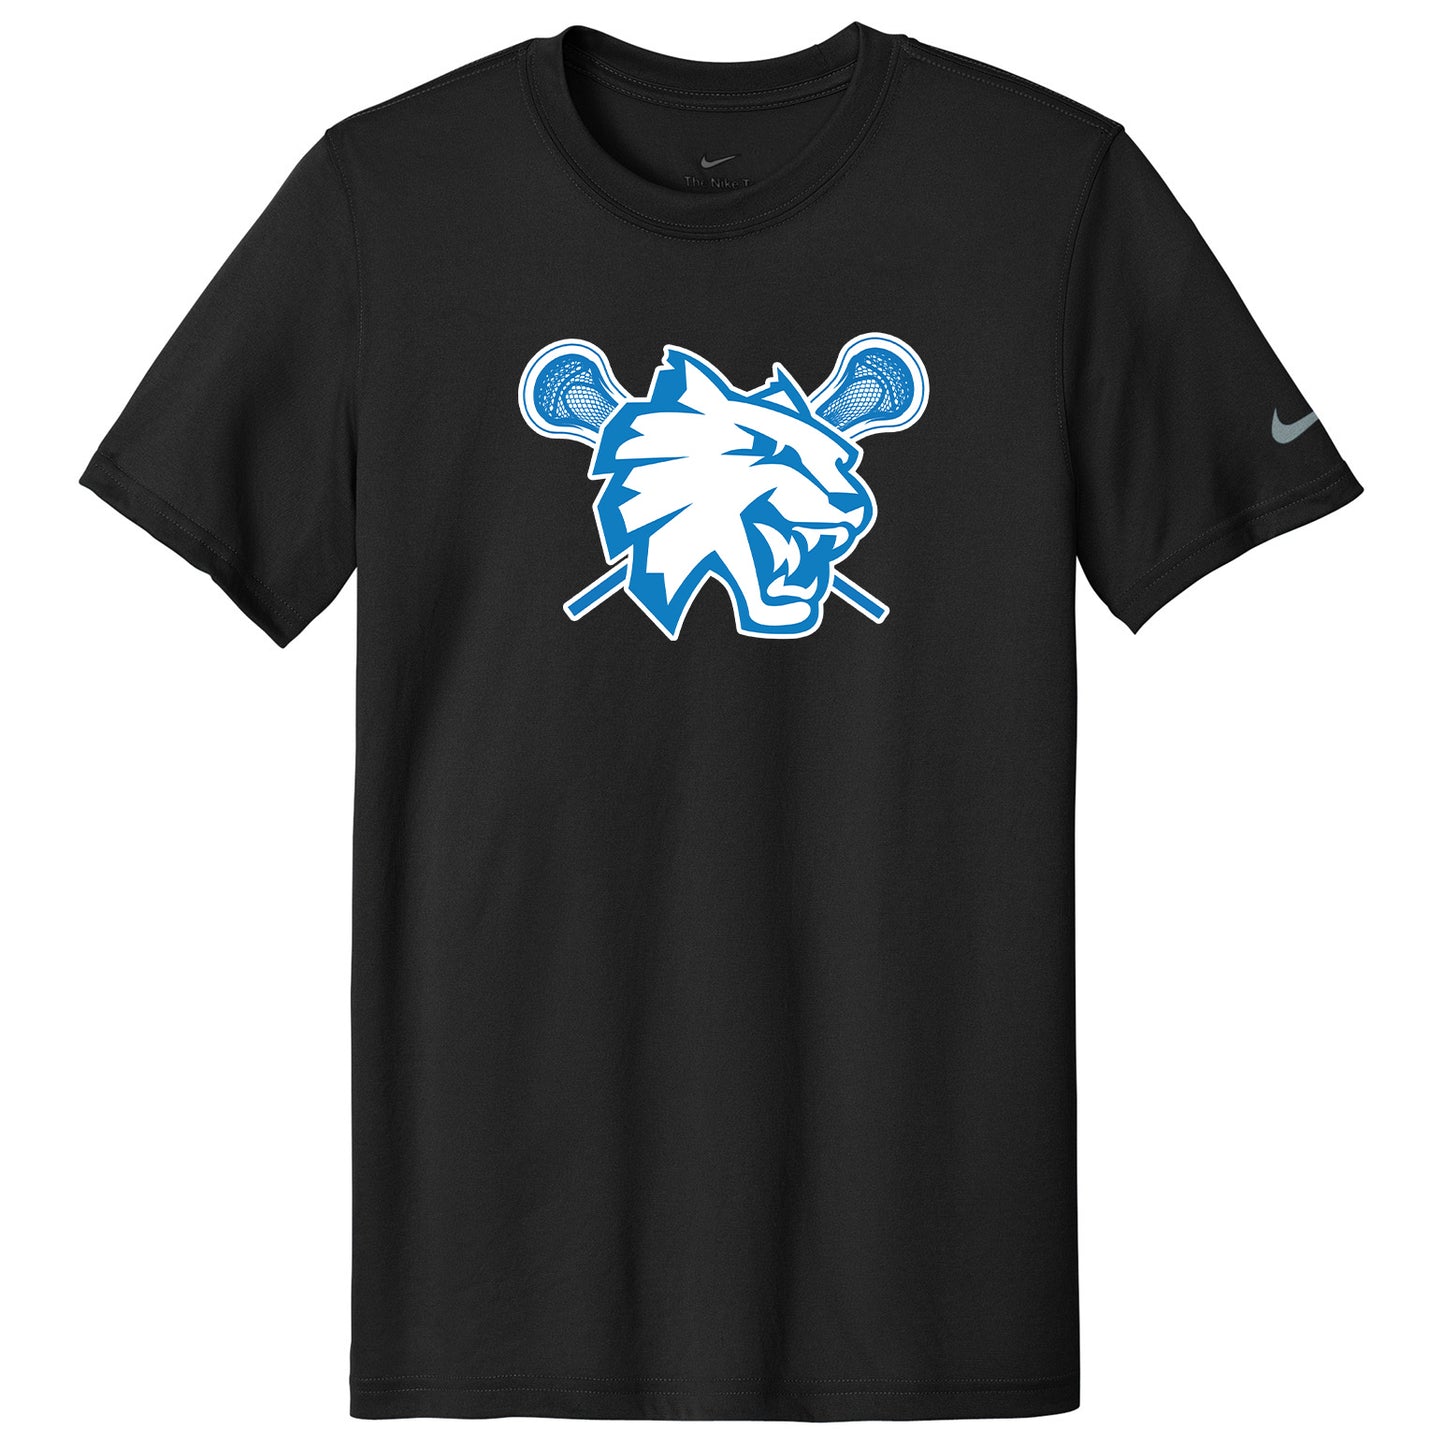 Suffield Youth Lacrosse - Ladies Nike Tee "Cat" - NKDX8734 (color options available)